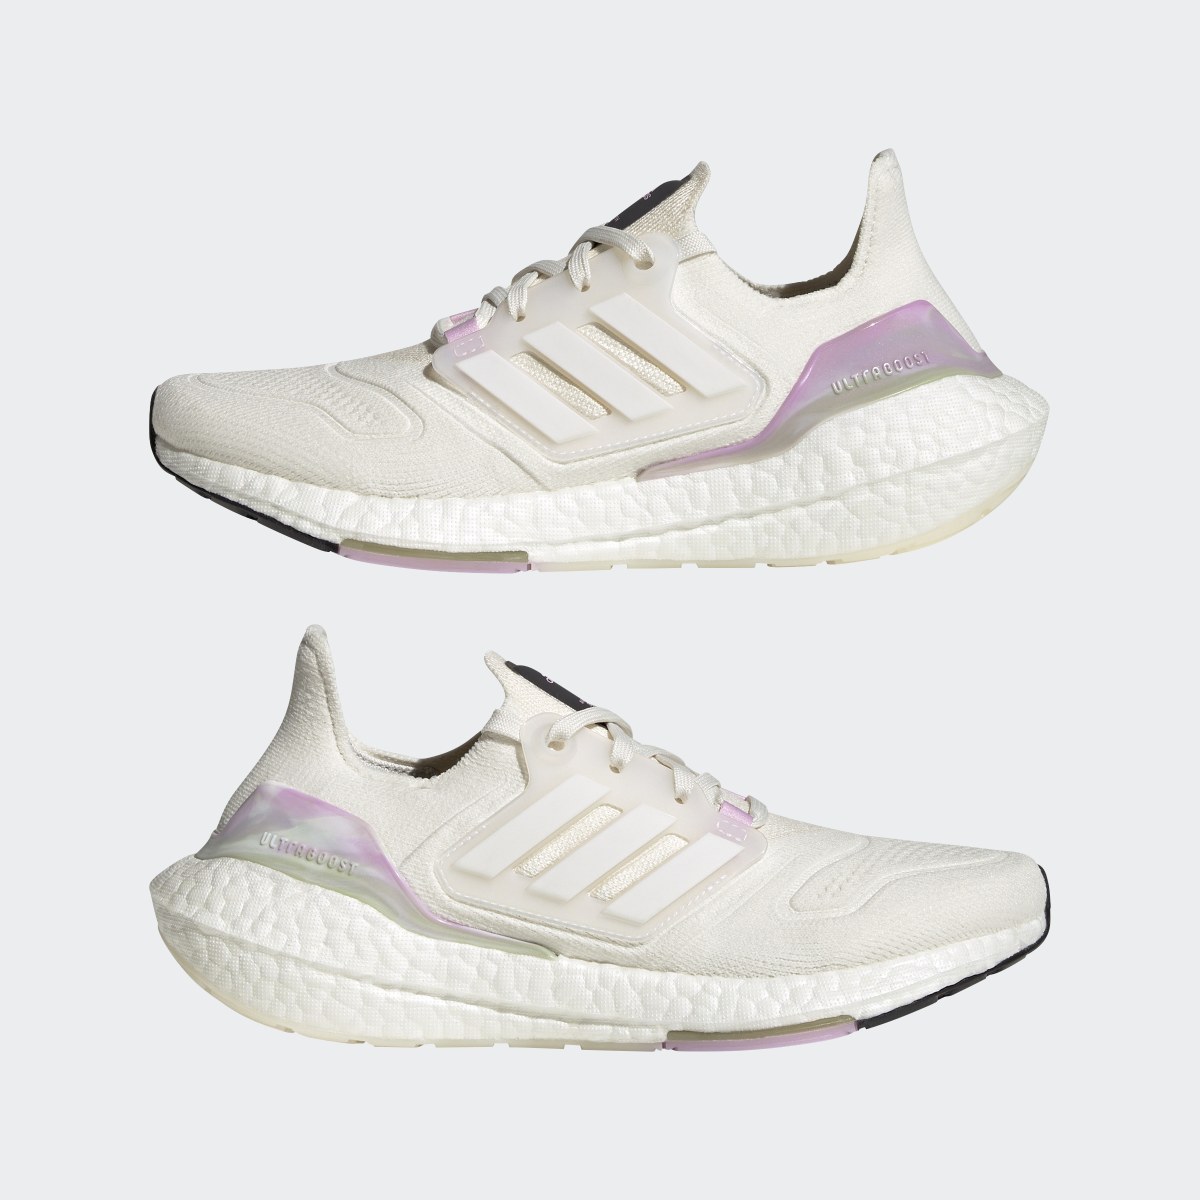 Adidas Ultraboost 22 Made With Nature Shoes. 11